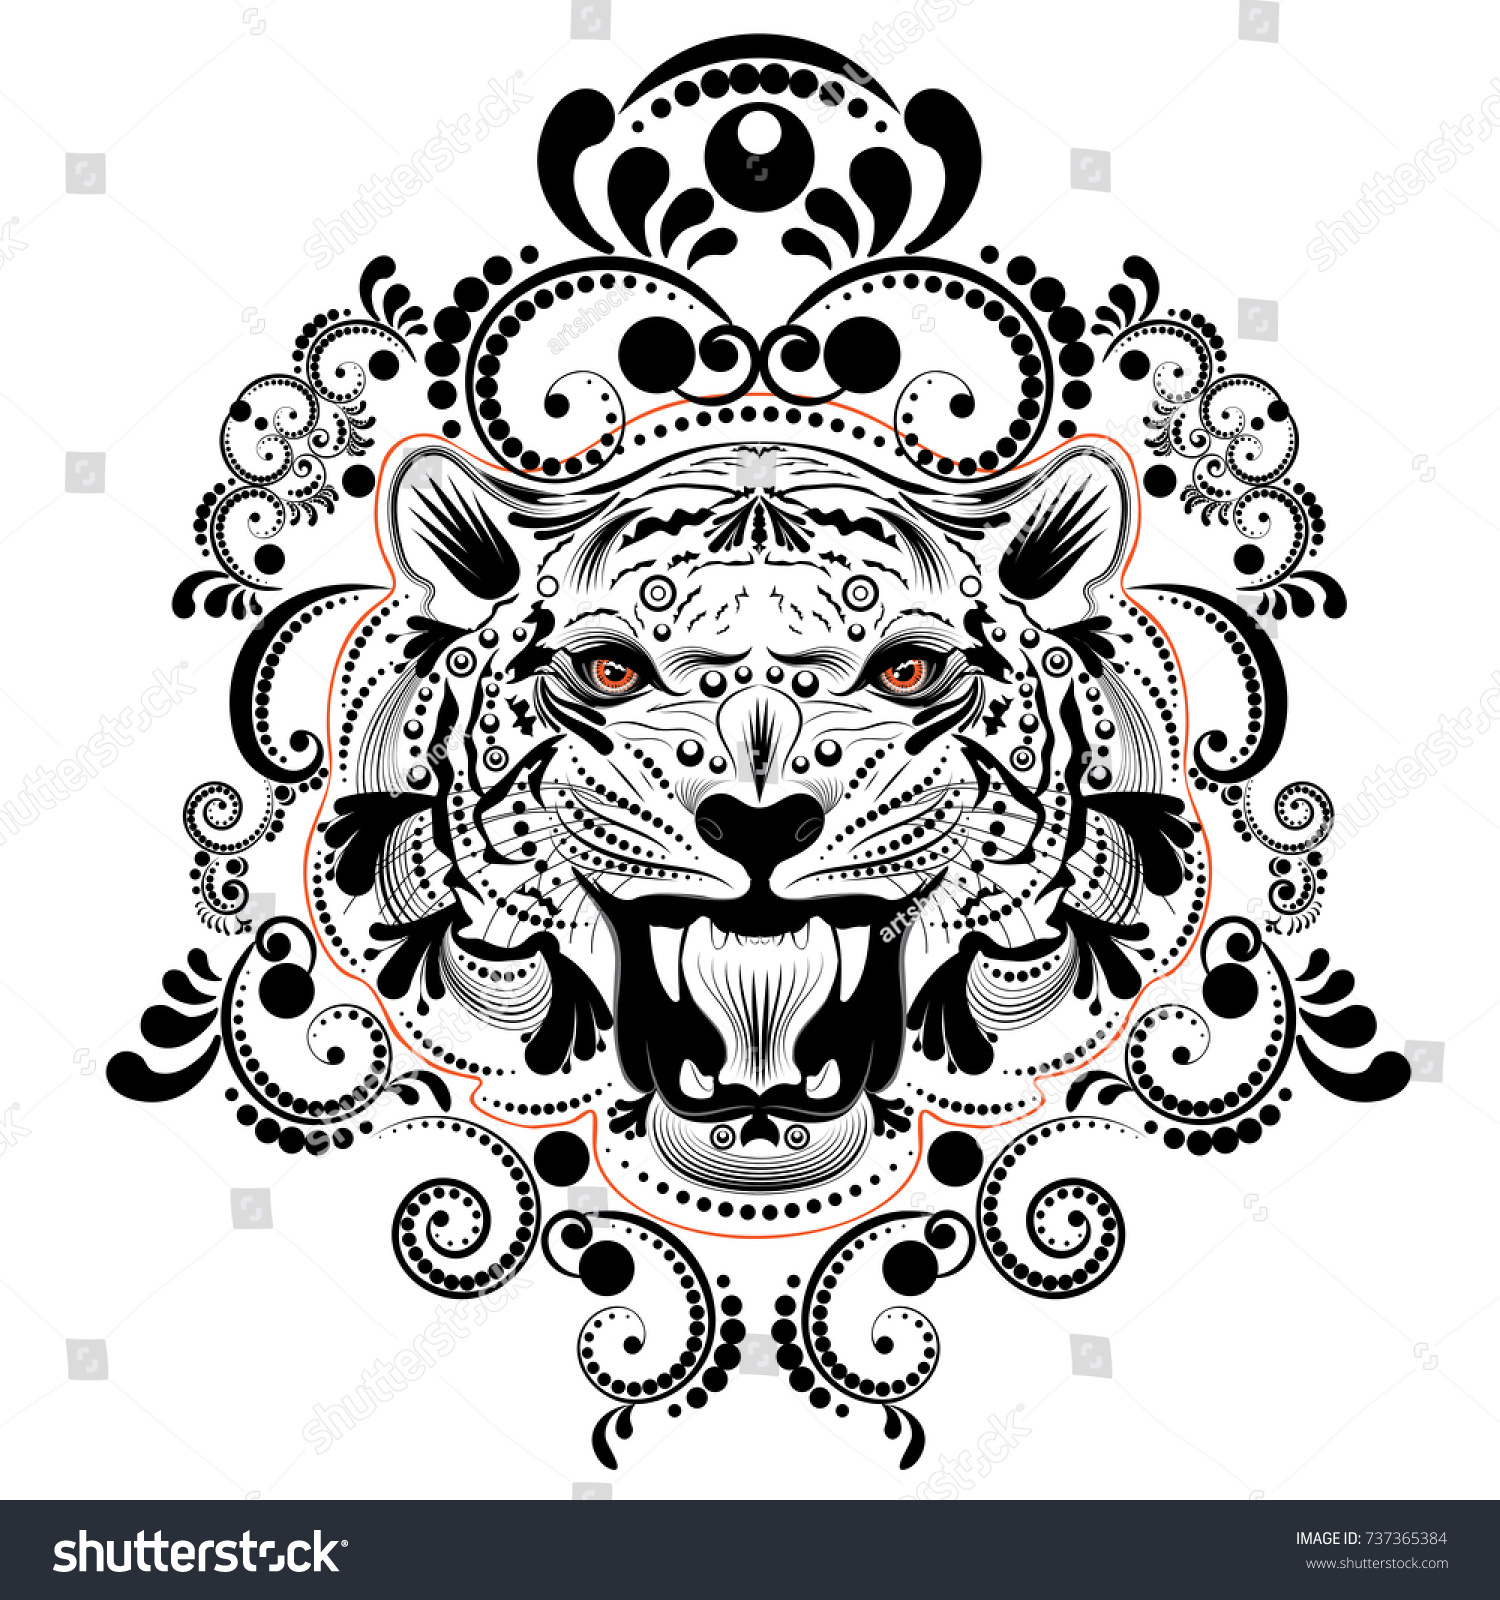 Stylized Ornamental Portrait Roaring Tiger Floral Stock Vector (Royalty ...